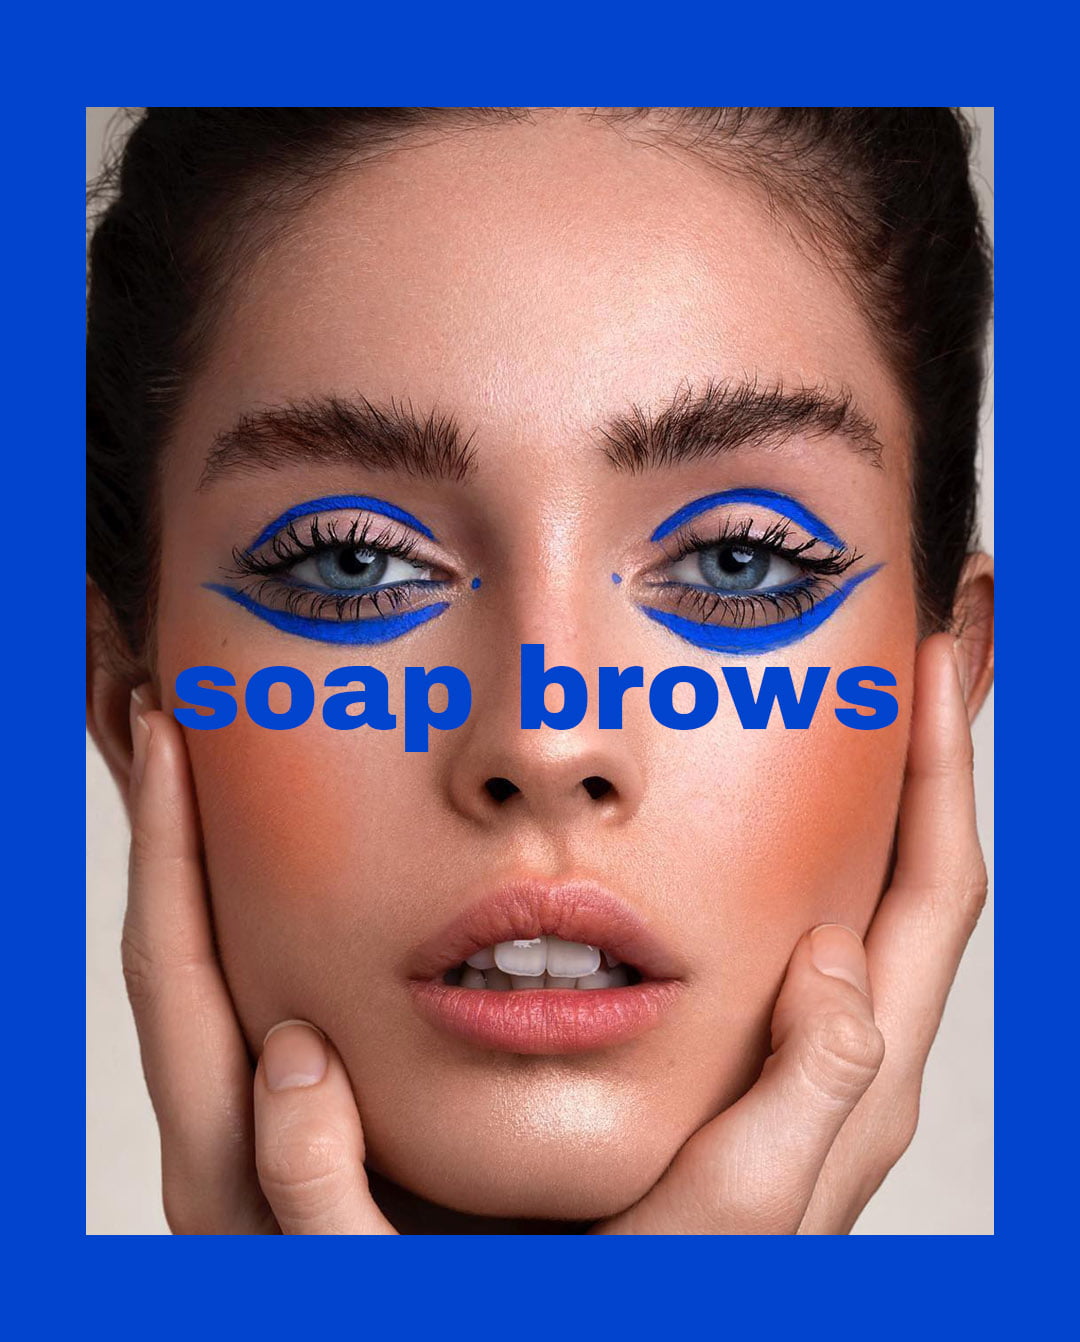 https://buro247.rs/wp-content/uploads/2019/10/soapbrows_cover.jpg